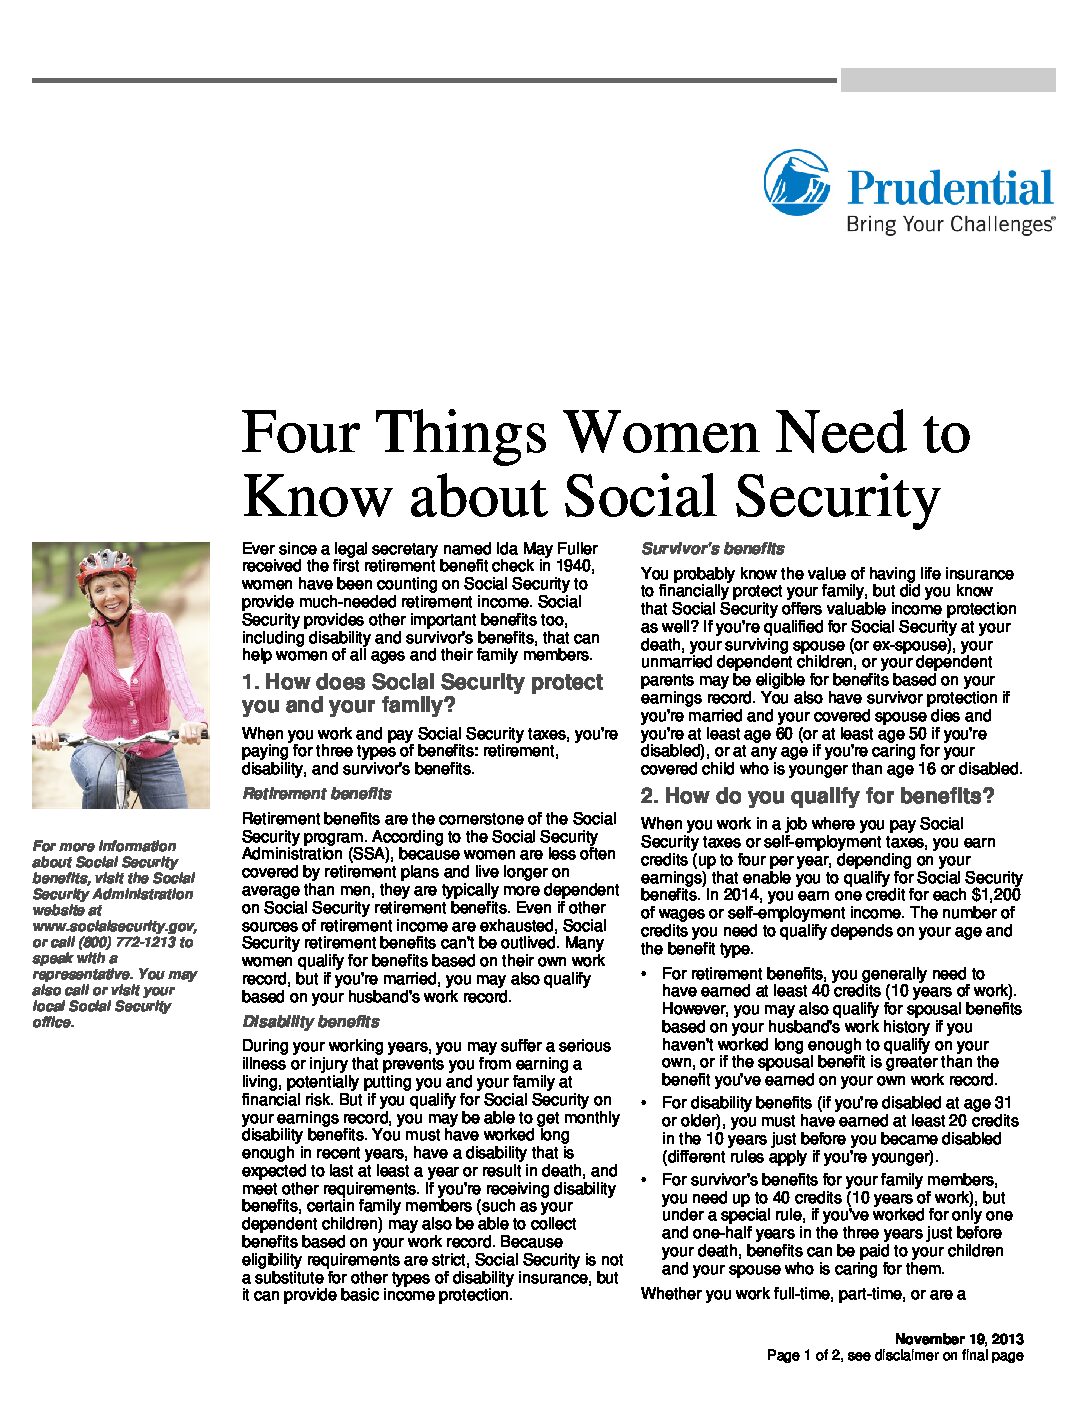 Four Things Women Need to Know about Social Security